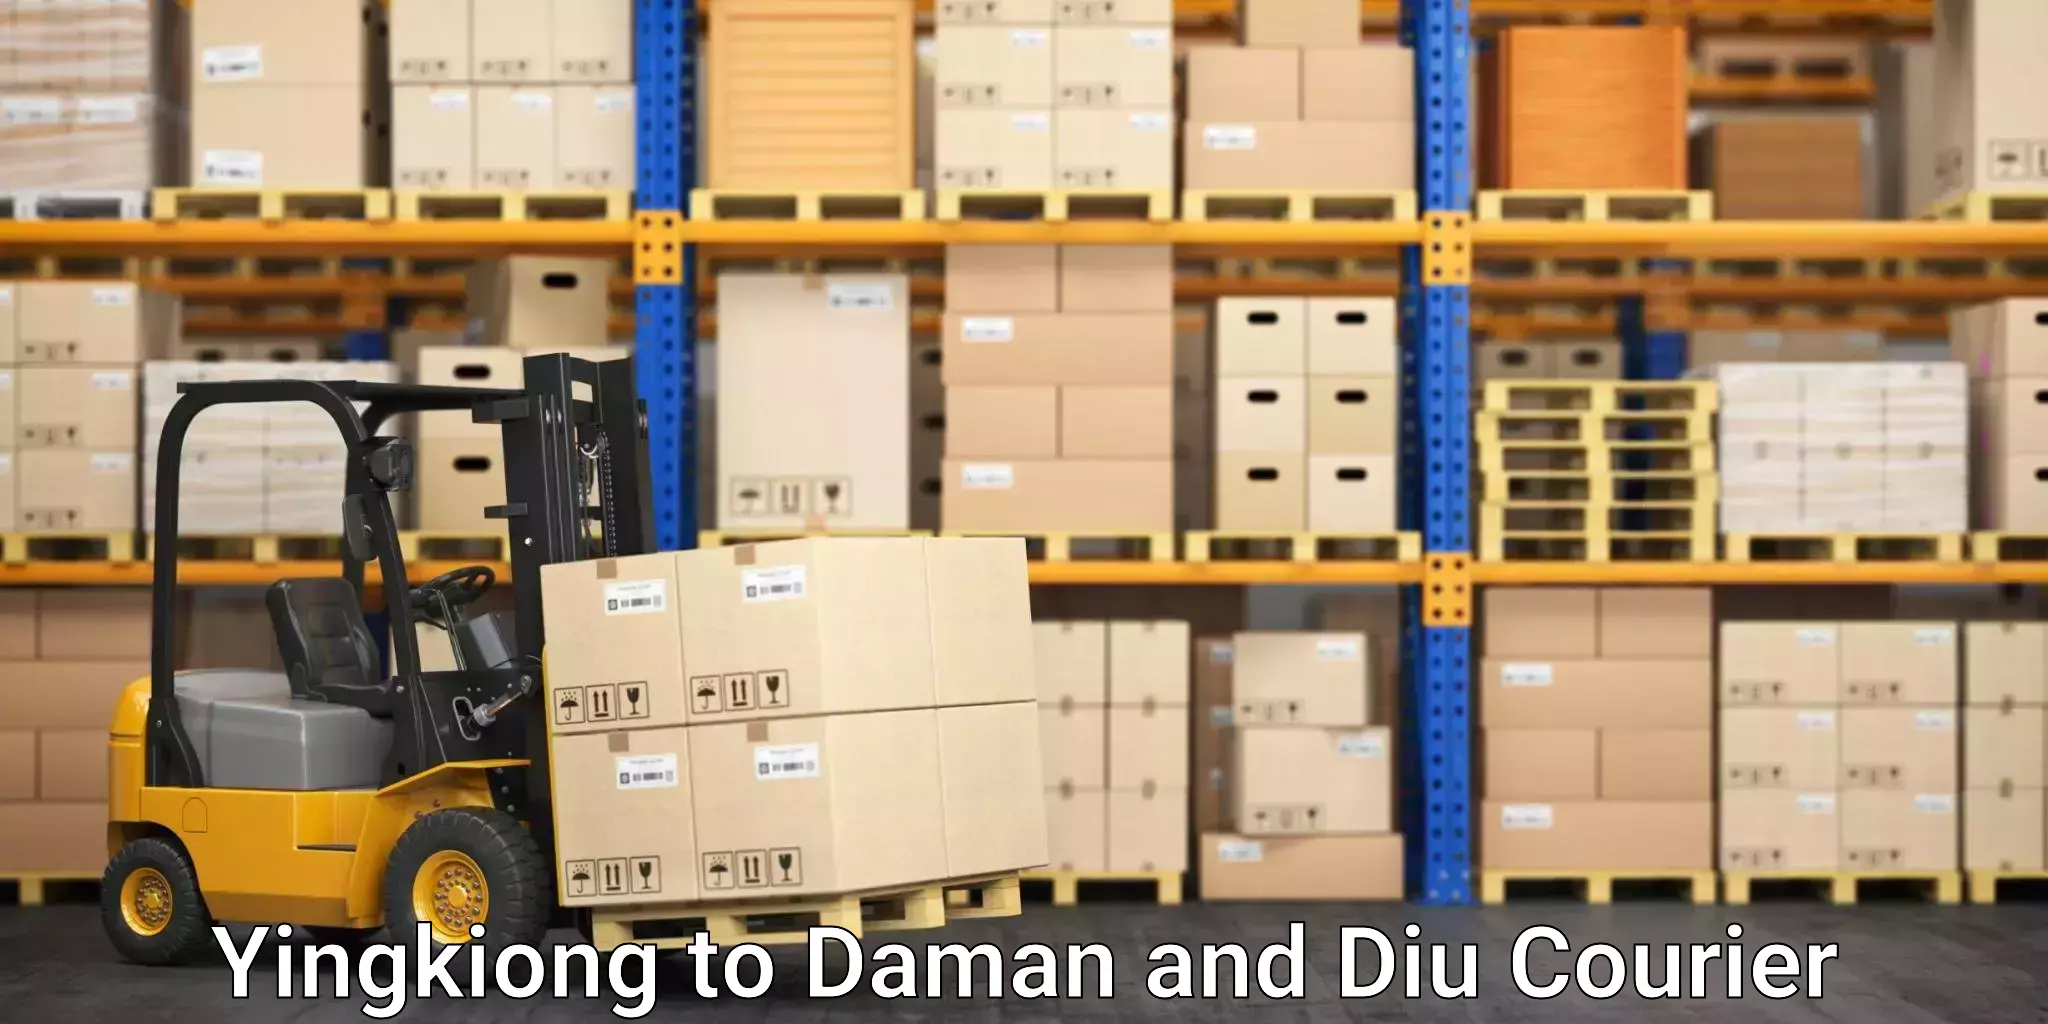 Reliable parcel services Yingkiong to Daman